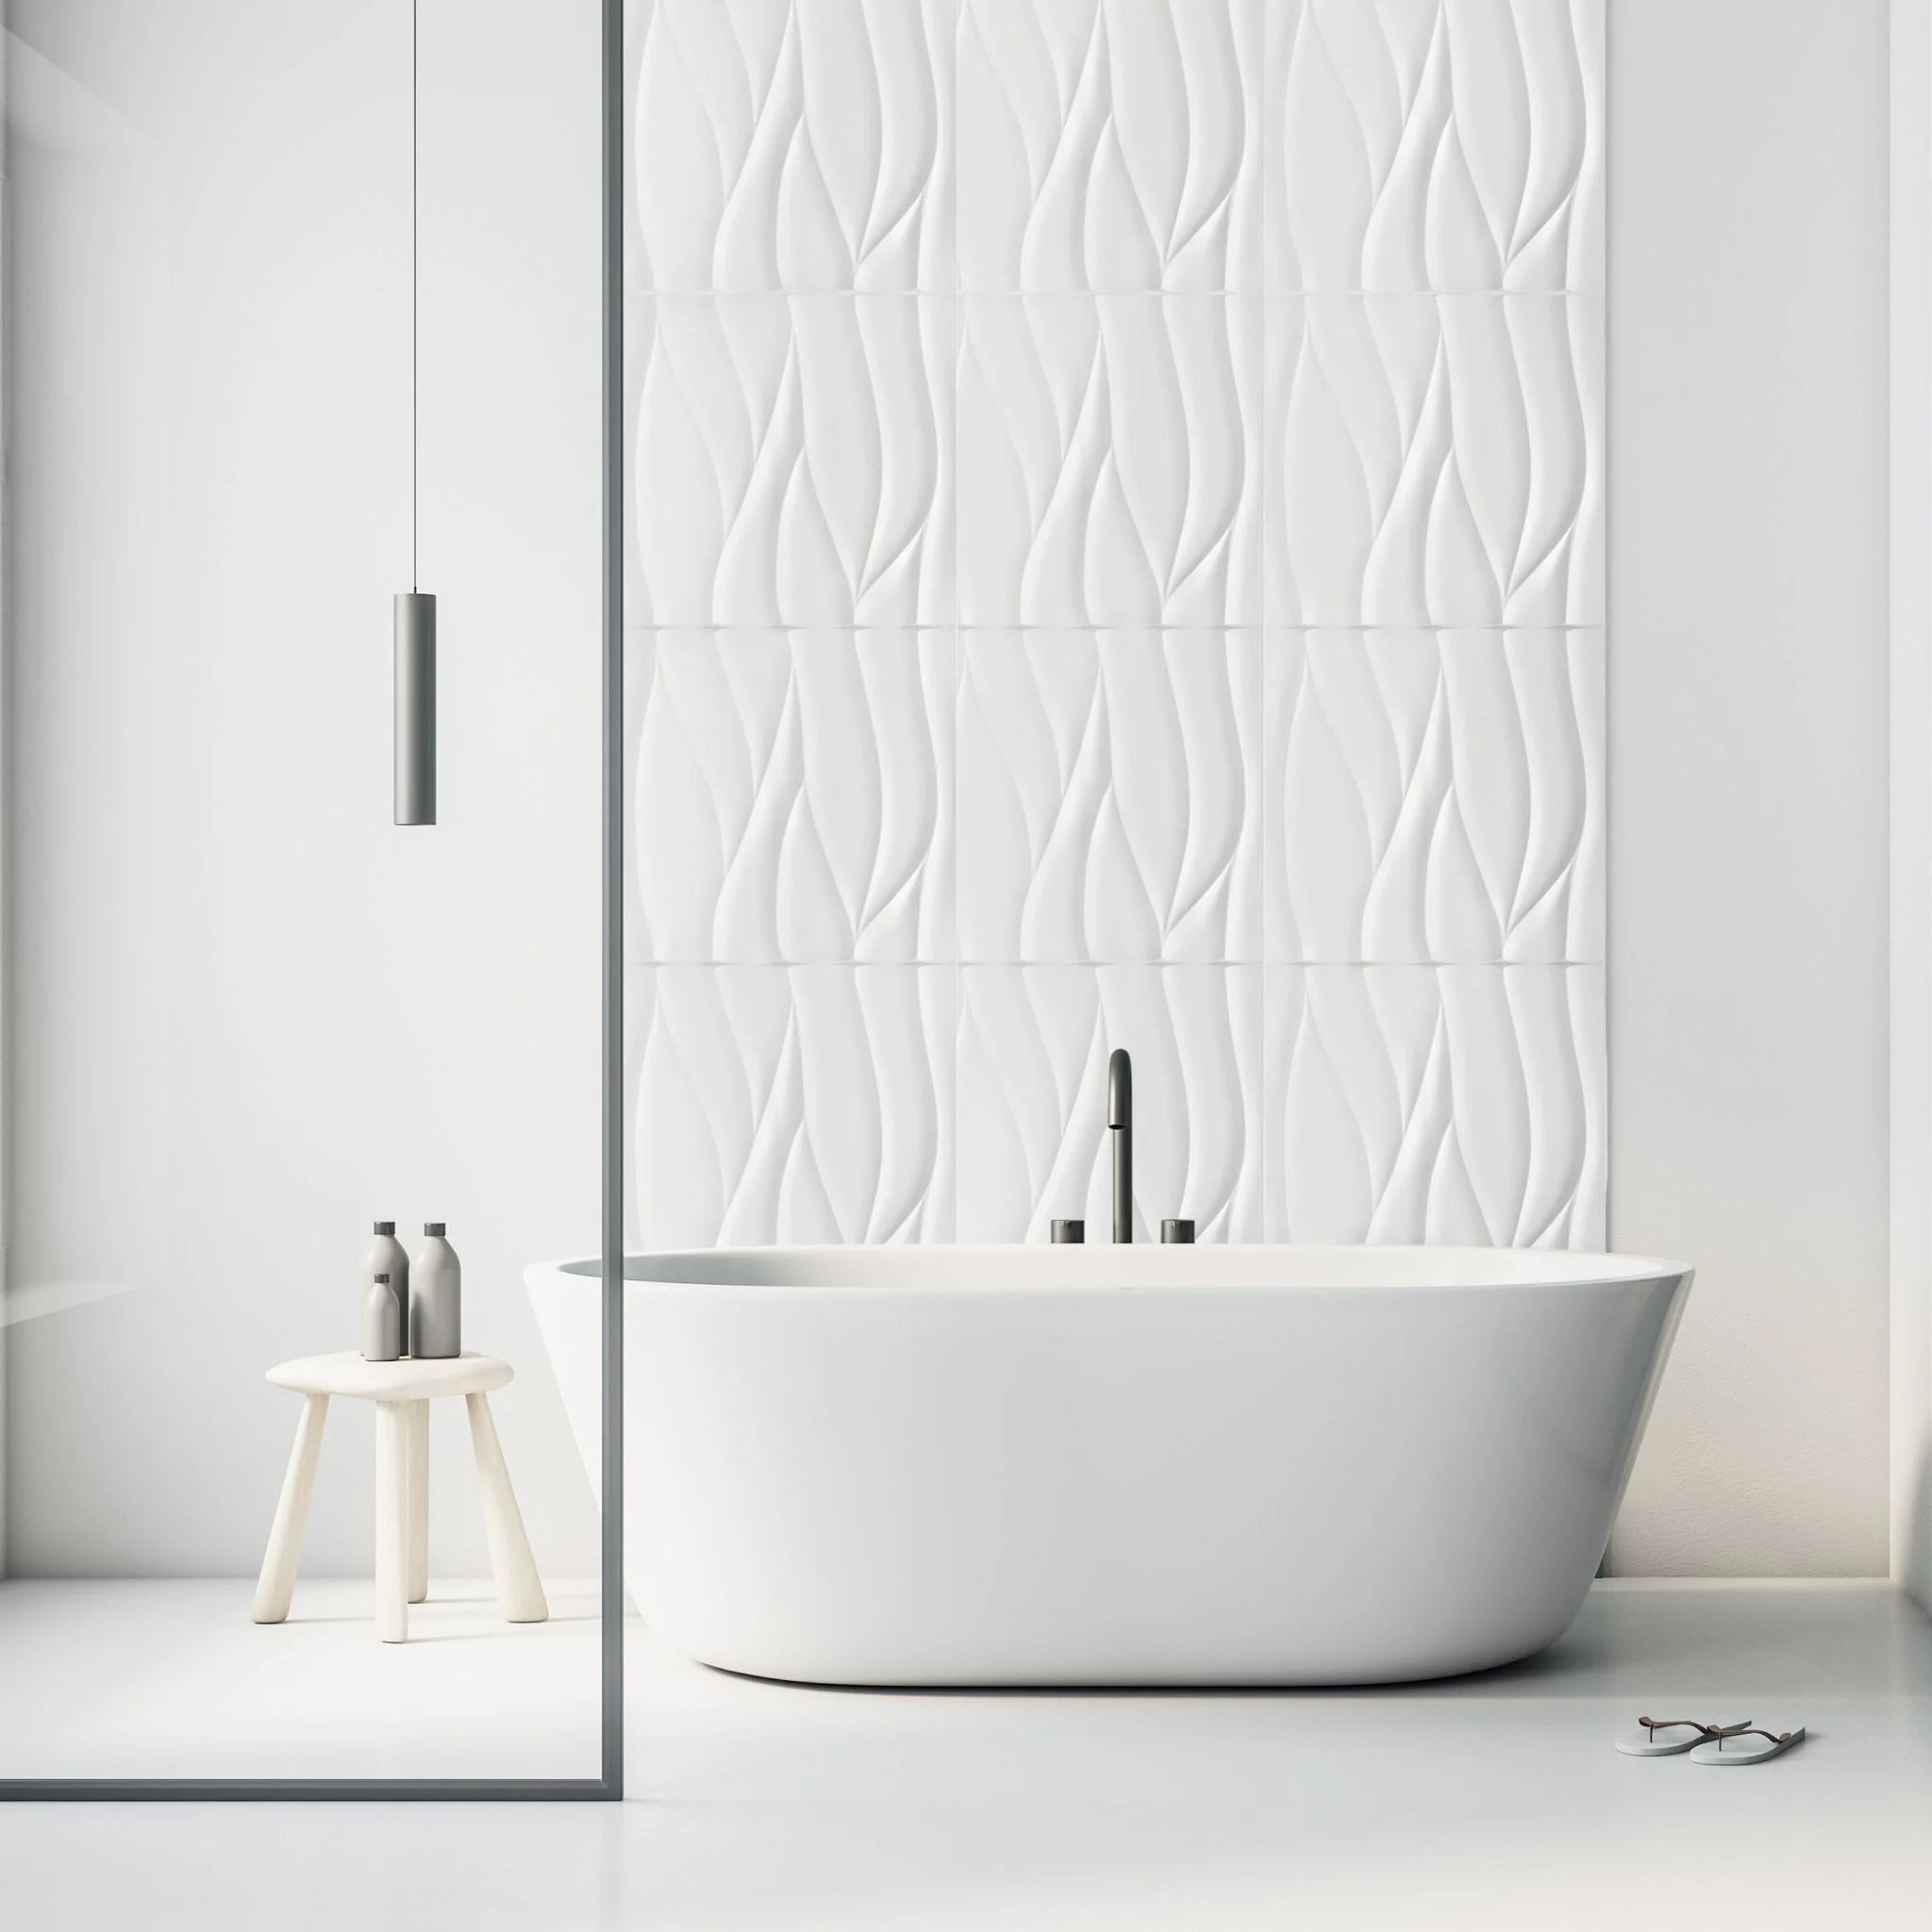 Bathroom with white wavy-patterned PVC wall panels and modern furniture